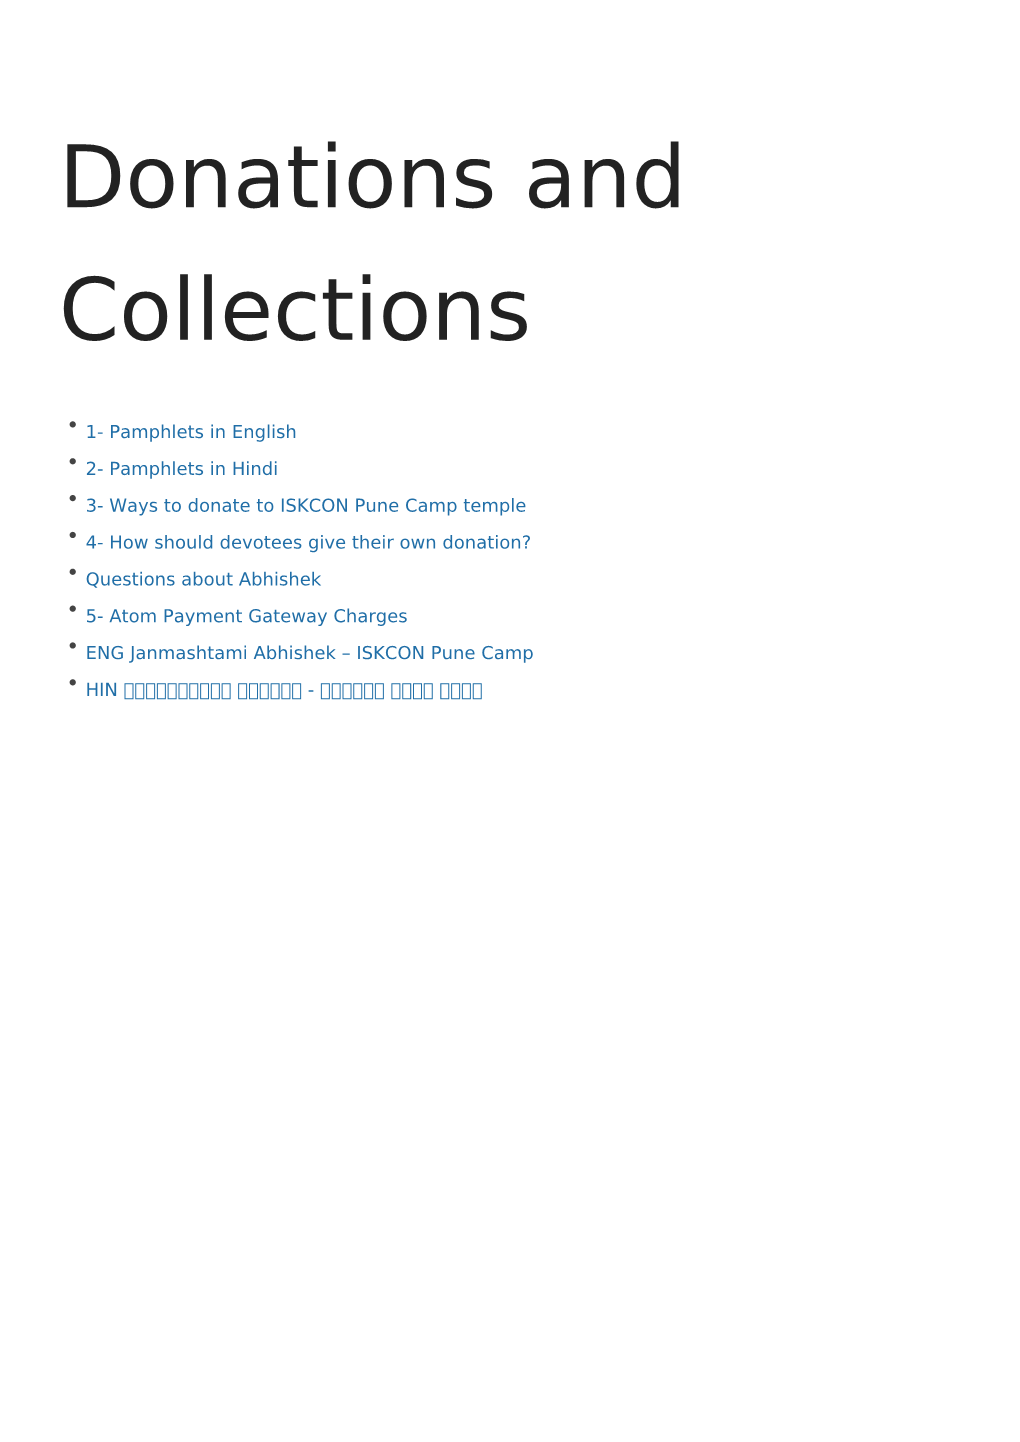 Donations and Collections